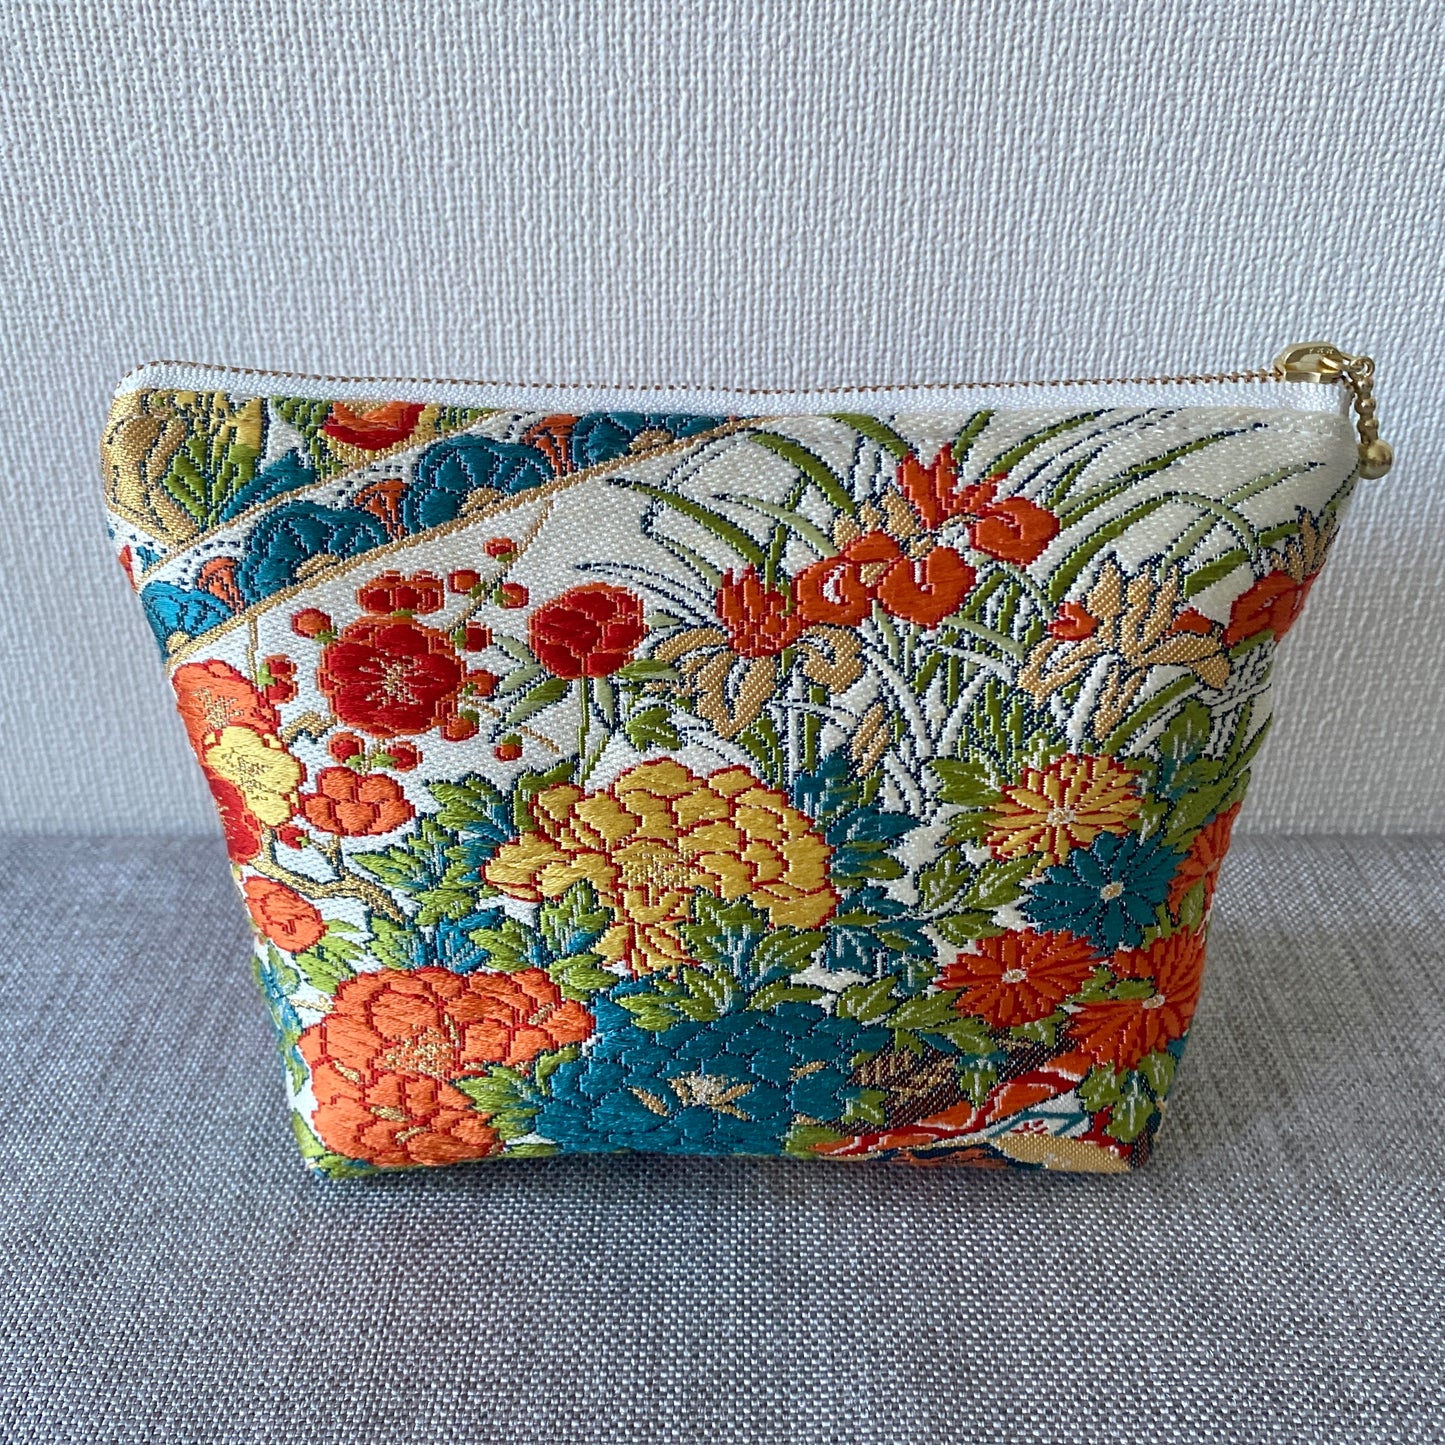 Small Silk Obi pouch, Handcrafted, Upcycled